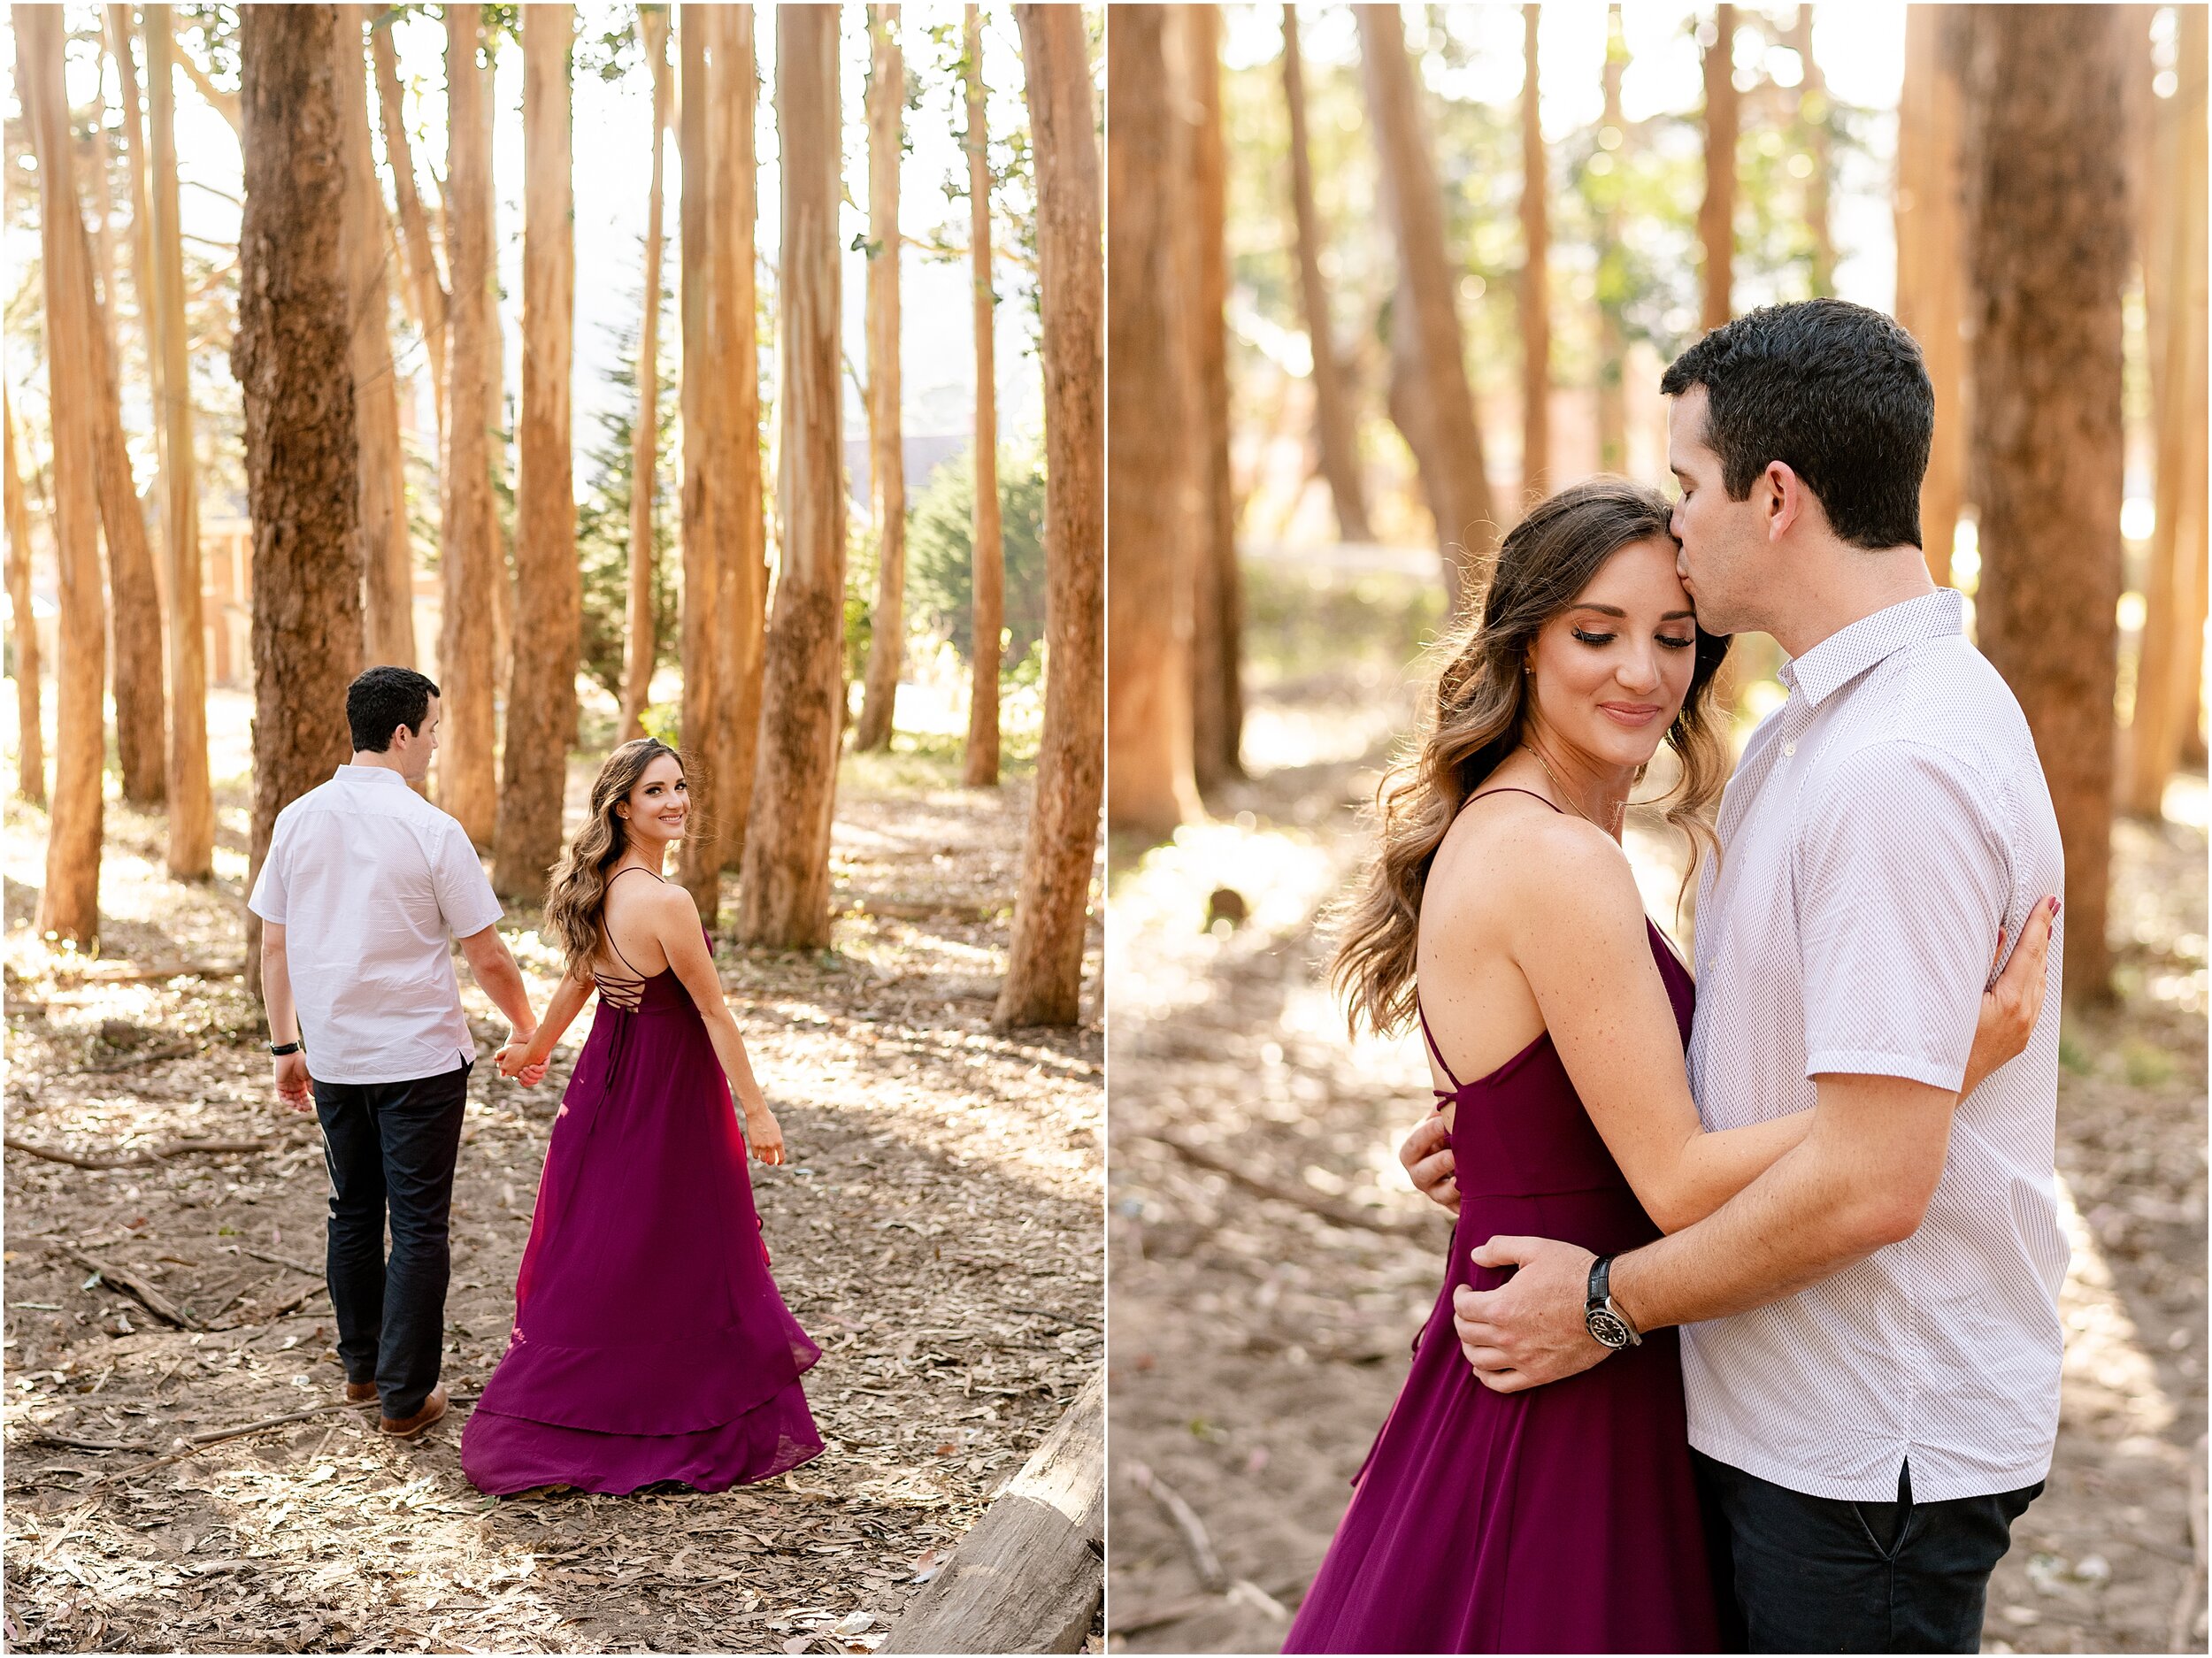 hannah leigh photography Baker Beach, Lovers Lane. Palace of Fine Arts Engagement Session San Franscico, CA_4818.jpg